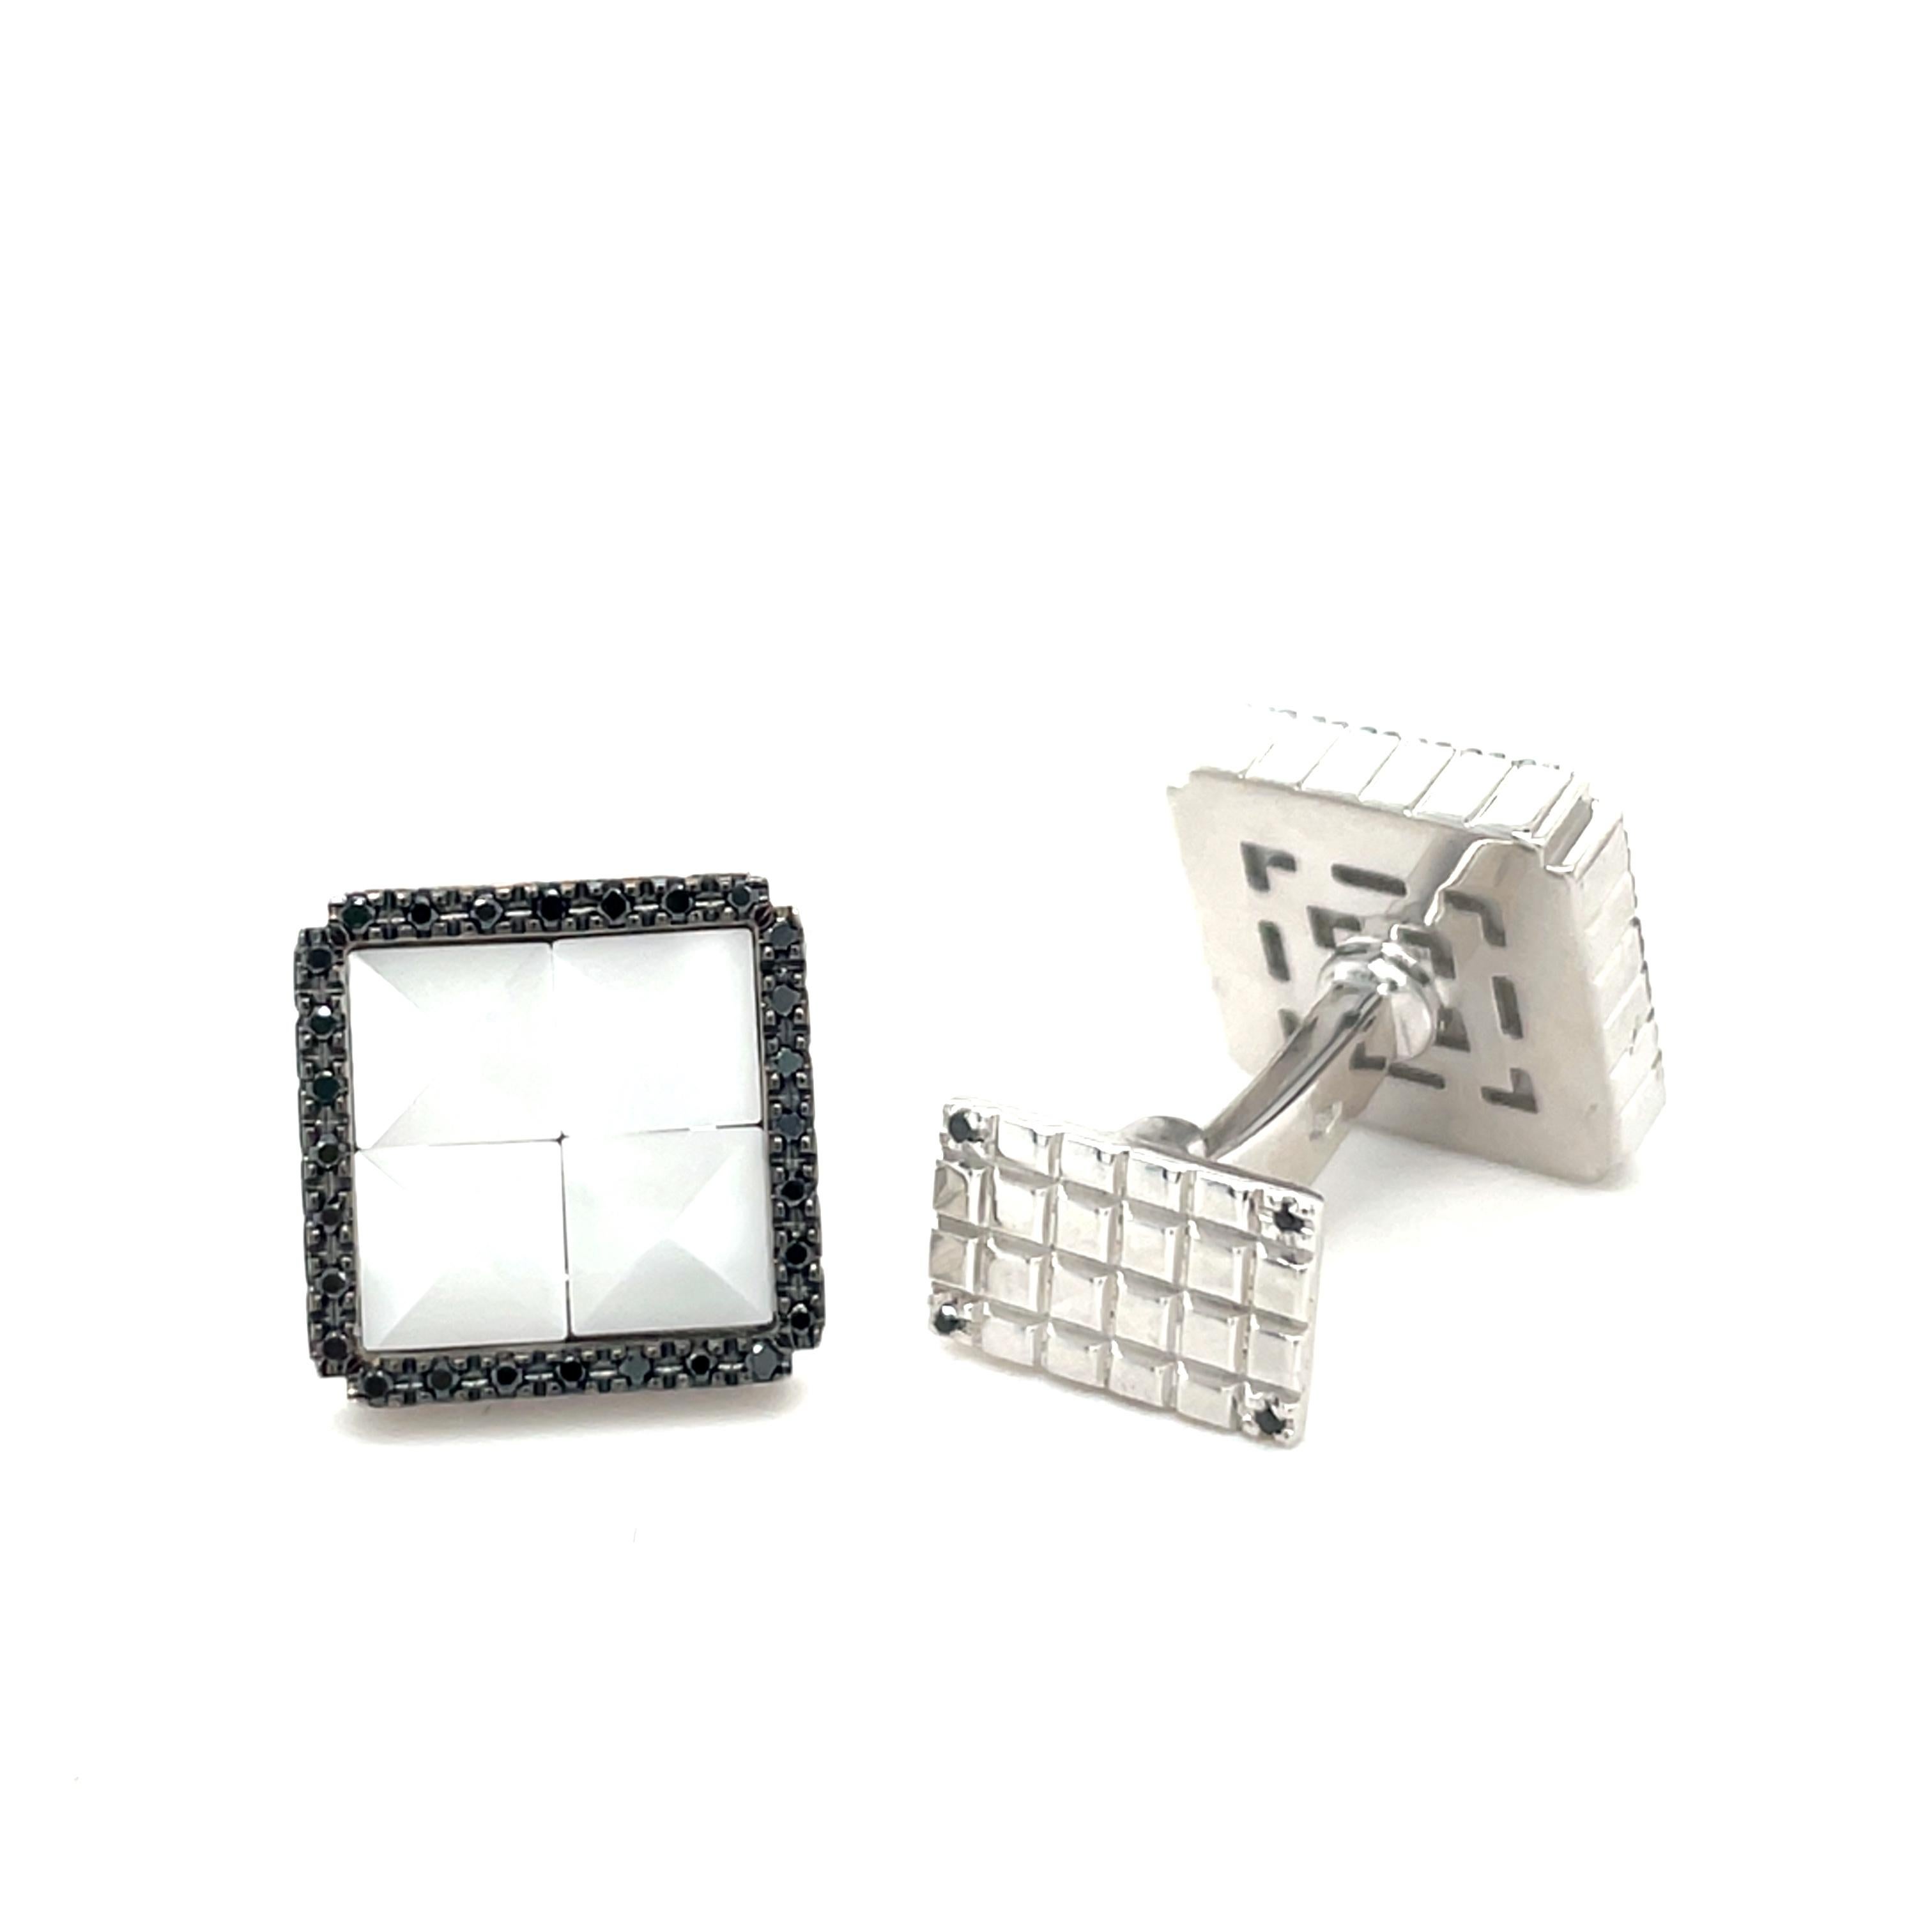 These white gold cufflinks are from Men's Collection. These cufflinks are decorated with black diamonds Diamonds 0.37 ct and white ceramic. The dimensions of the cufflinks are 1.3cm x 1.3cm. These cufflinks are a perfect upgrade to every special